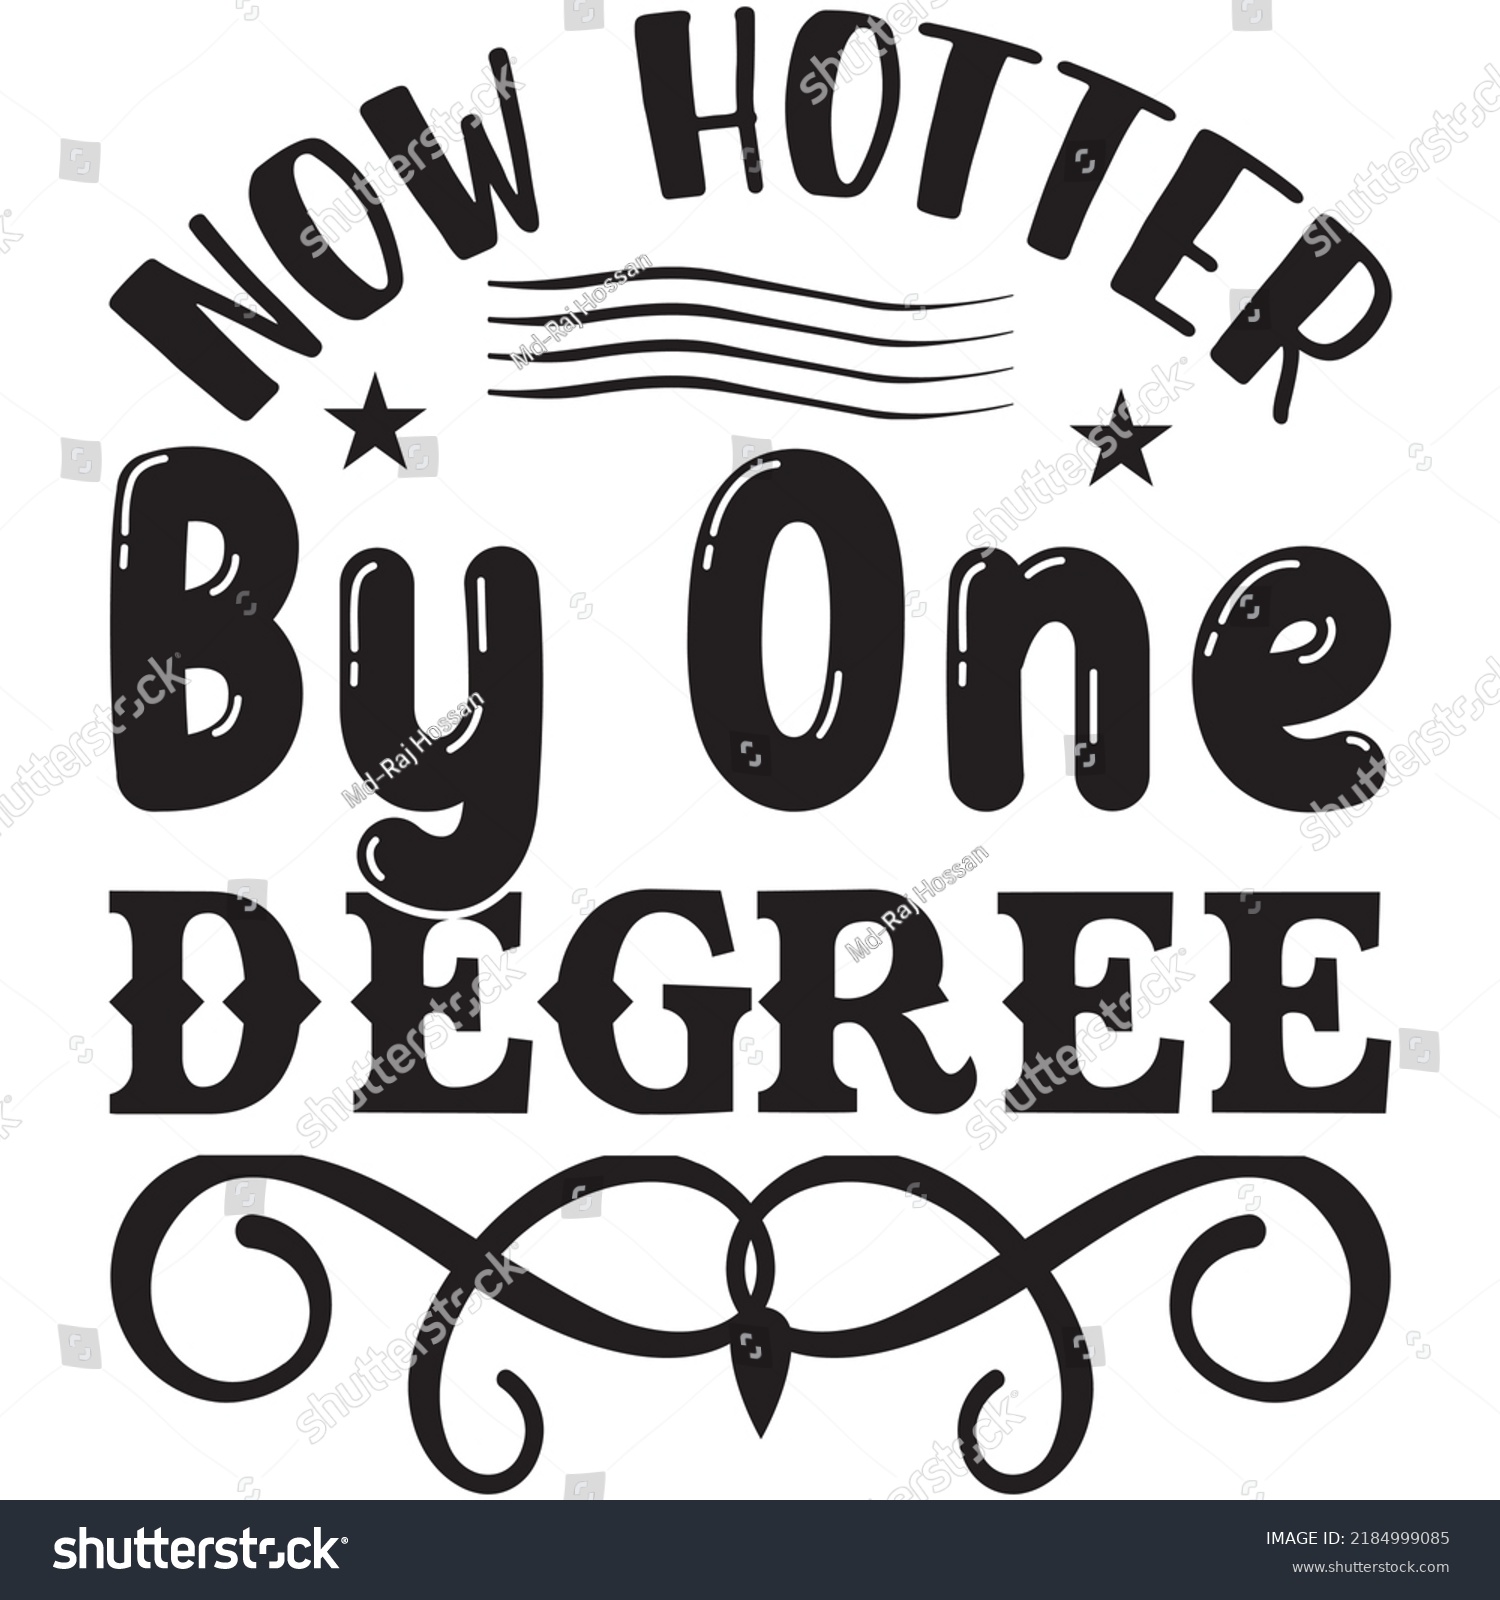 SVG of Now Hotter By One Degree t-shirt design vector file. svg